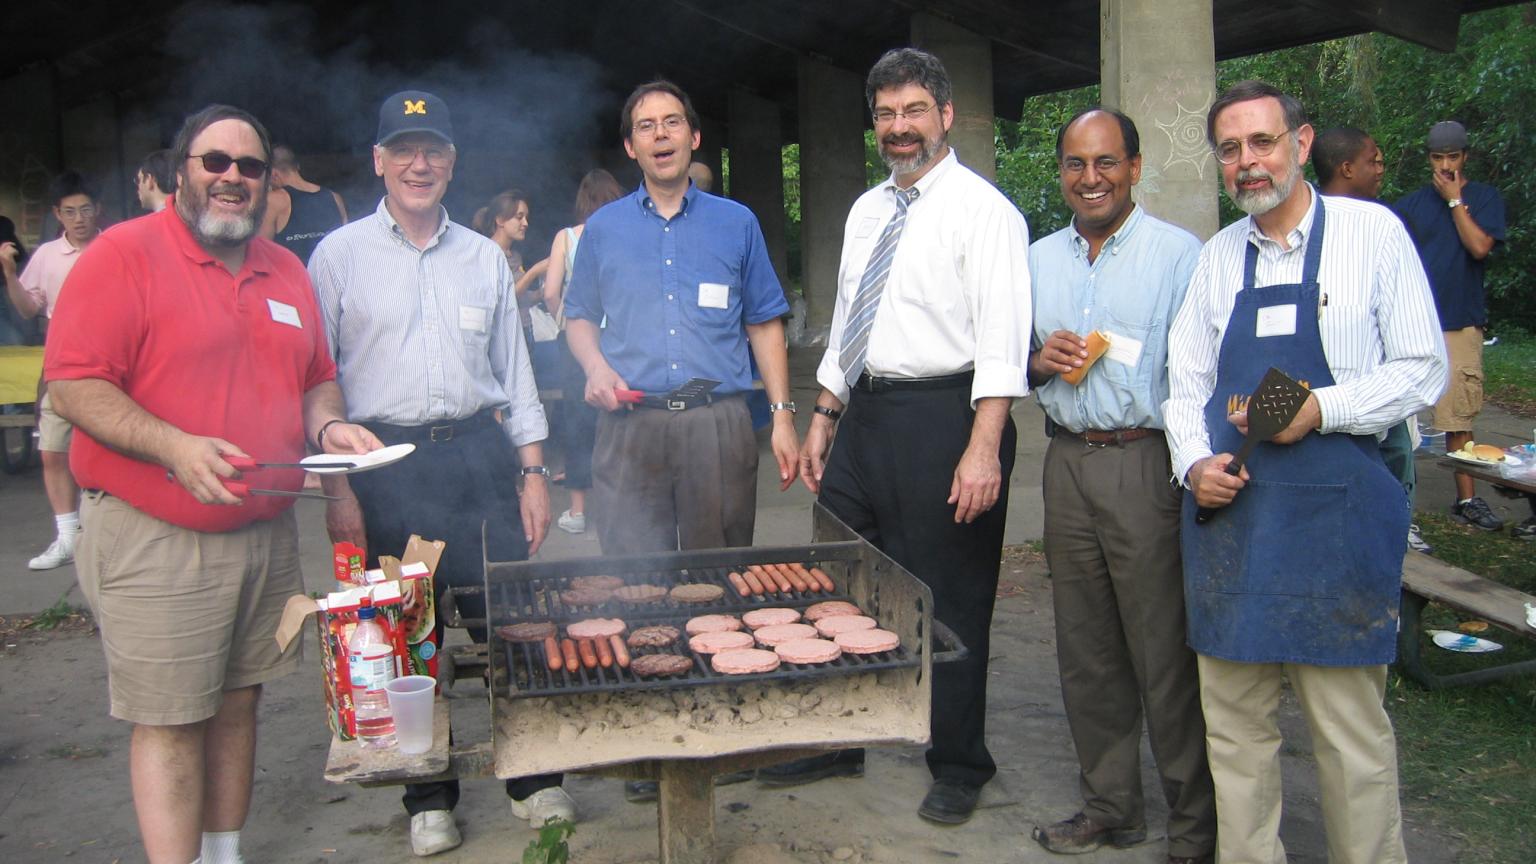 Kent with other Galens faculty standing around a grill 